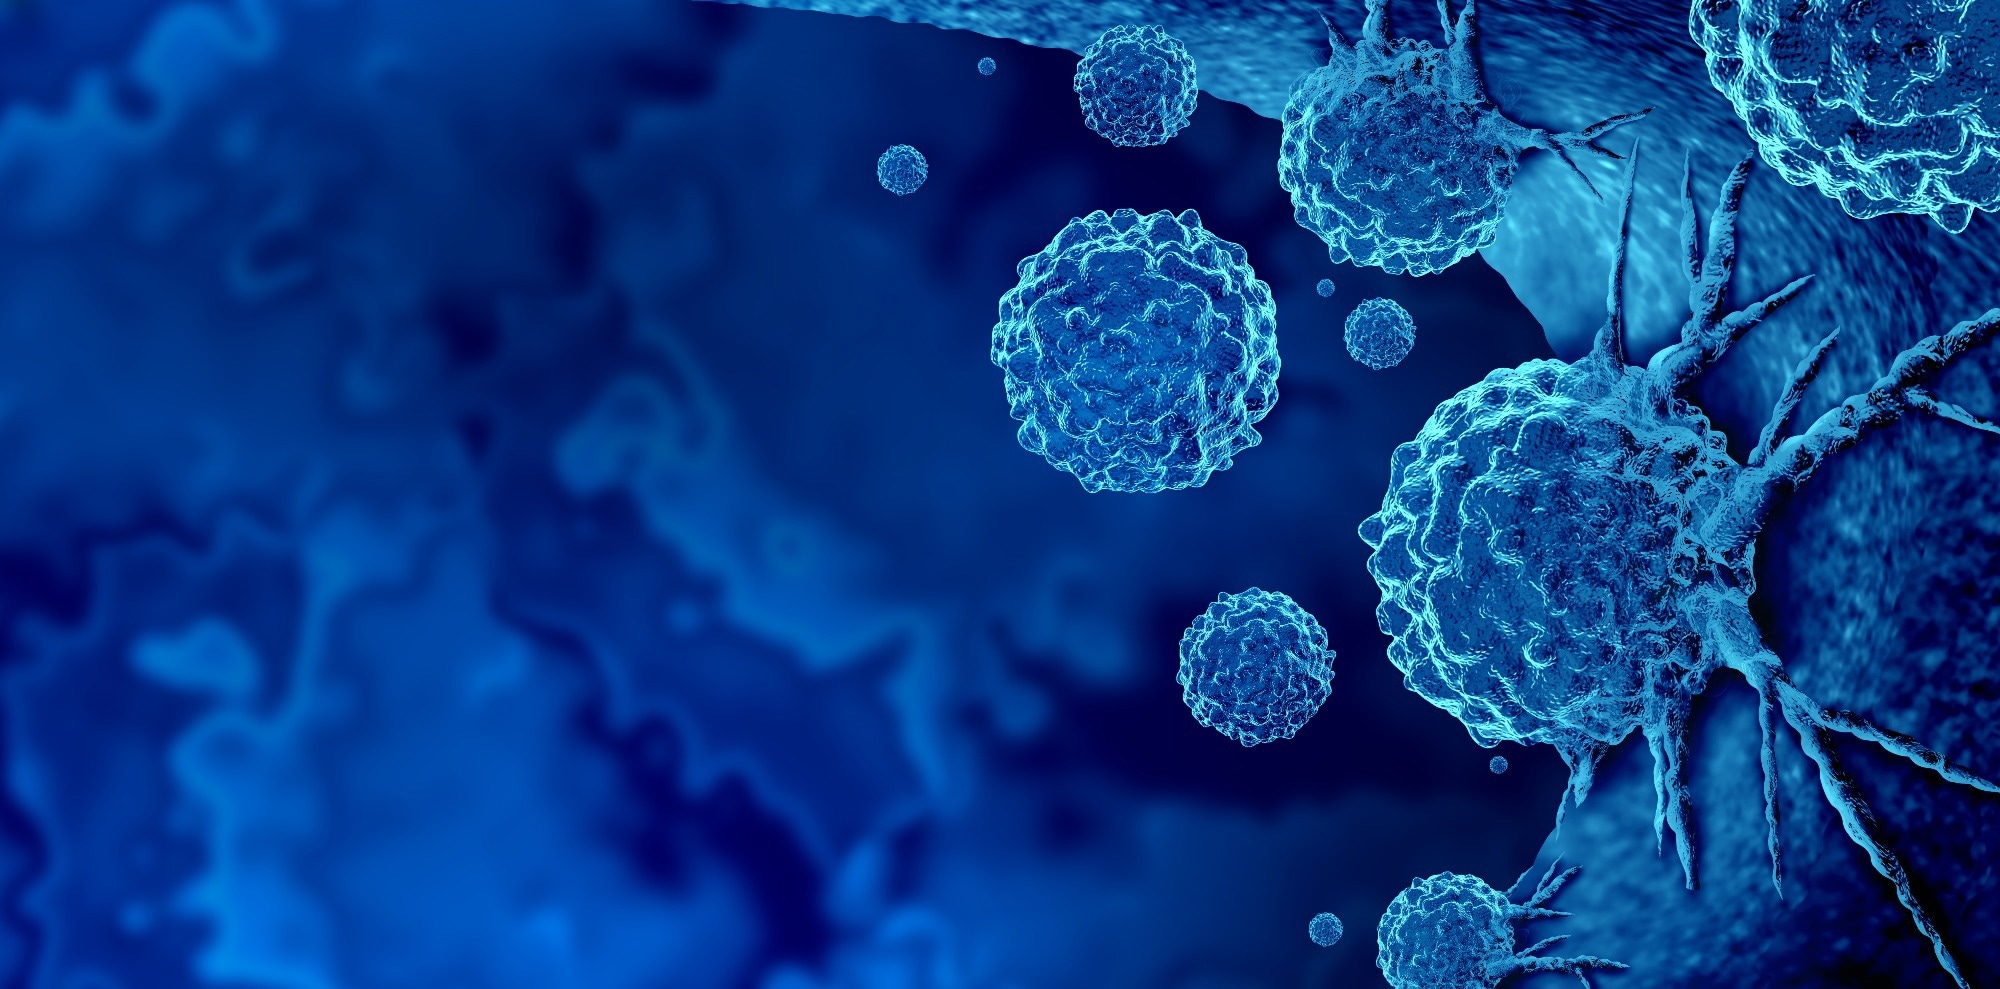 Study: YAP-controlled MHC I and CXCL10 expression potentiates antitumor immunity independently of IFNγ signaling. Image Credit: Lightspring/Shutterstock